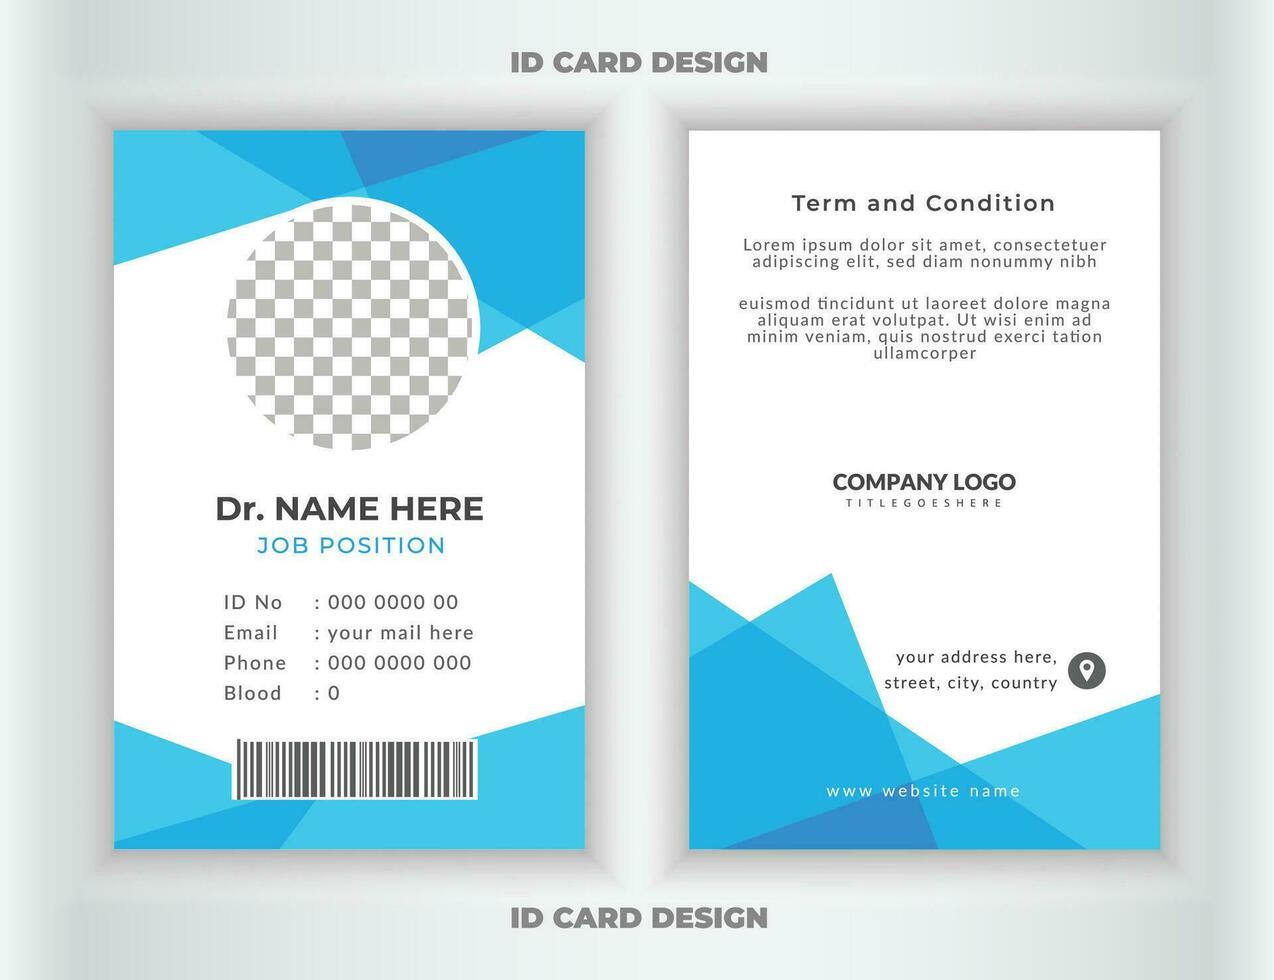 ID card design for medical identity. Medical style id card design. Doctor id card template for medical or hospital and healthcare vertical id card design. vector